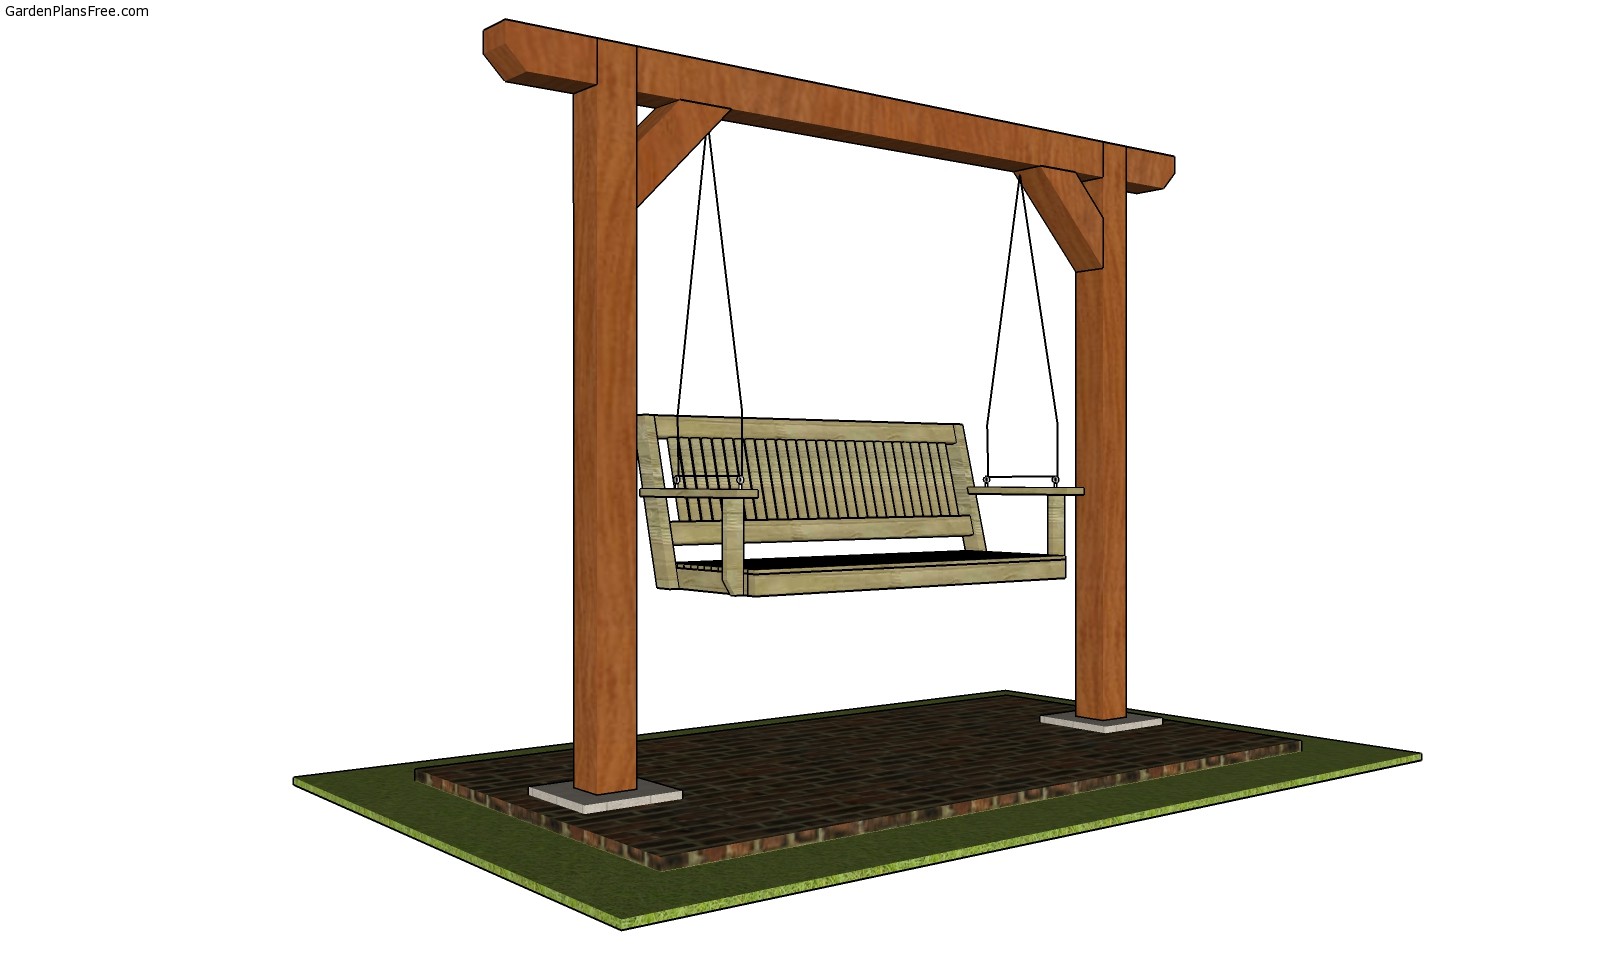 2 Post Swing Set Free Diy Plans, How To Build An Outdoor Swing Stand